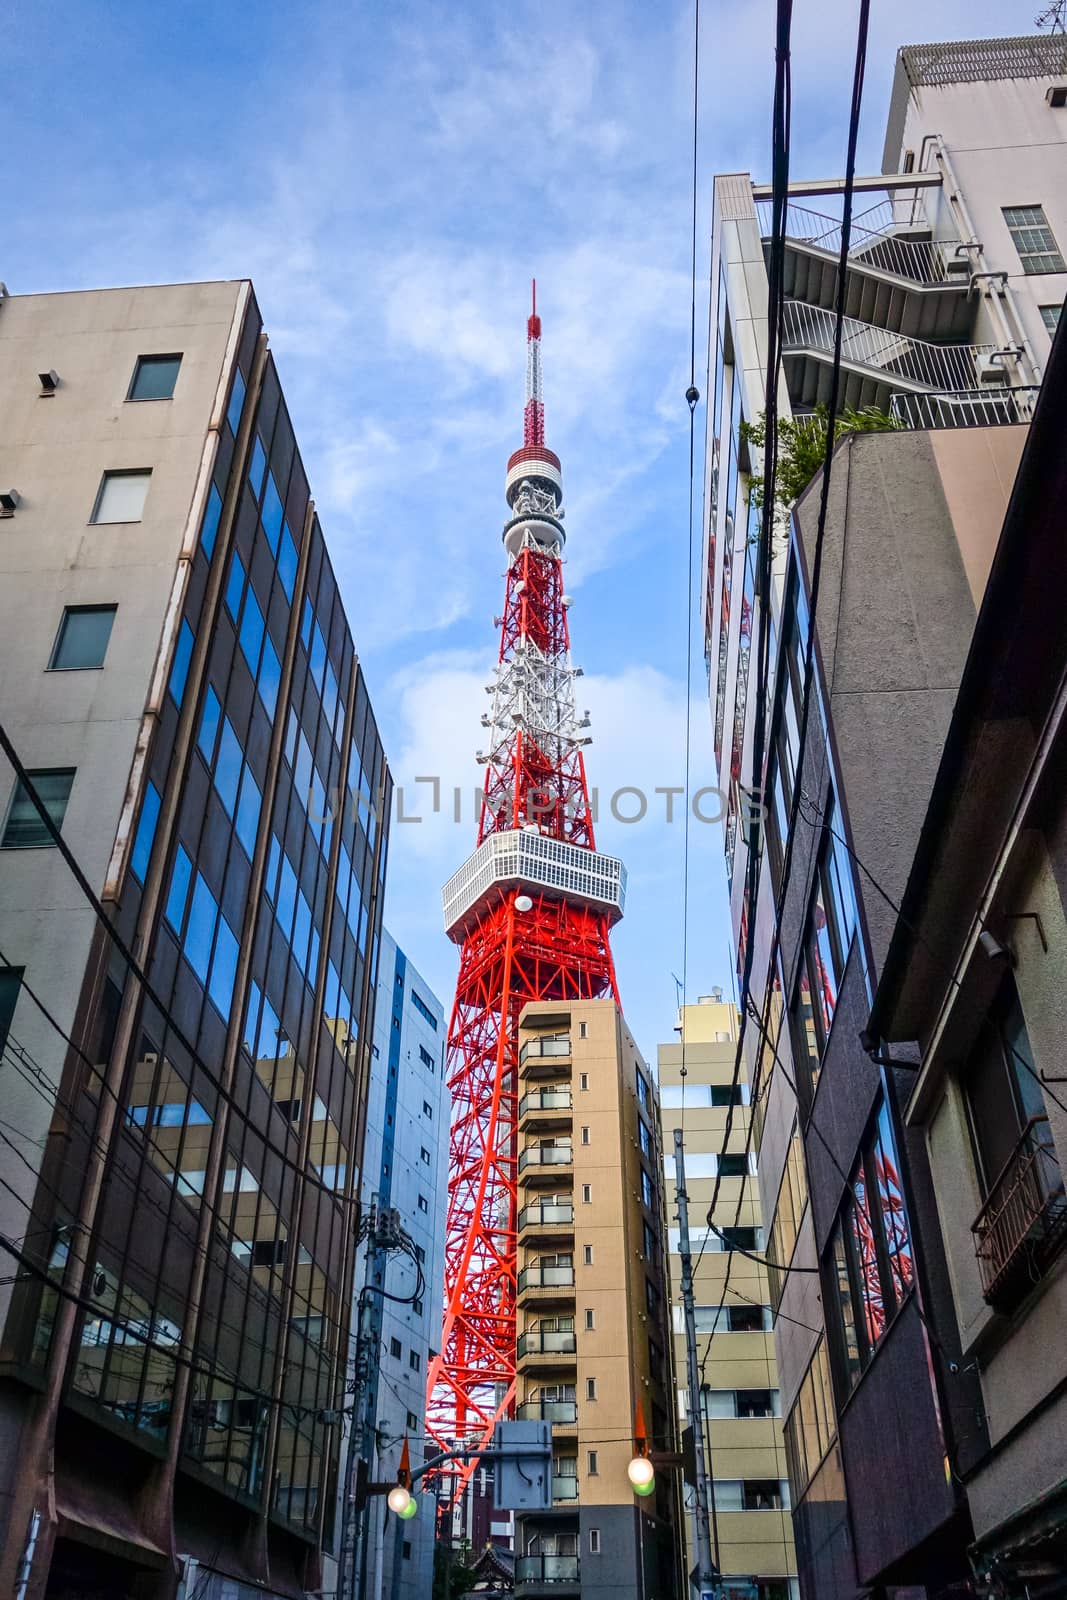 Tokyo tower and buildings view from the street, Japan